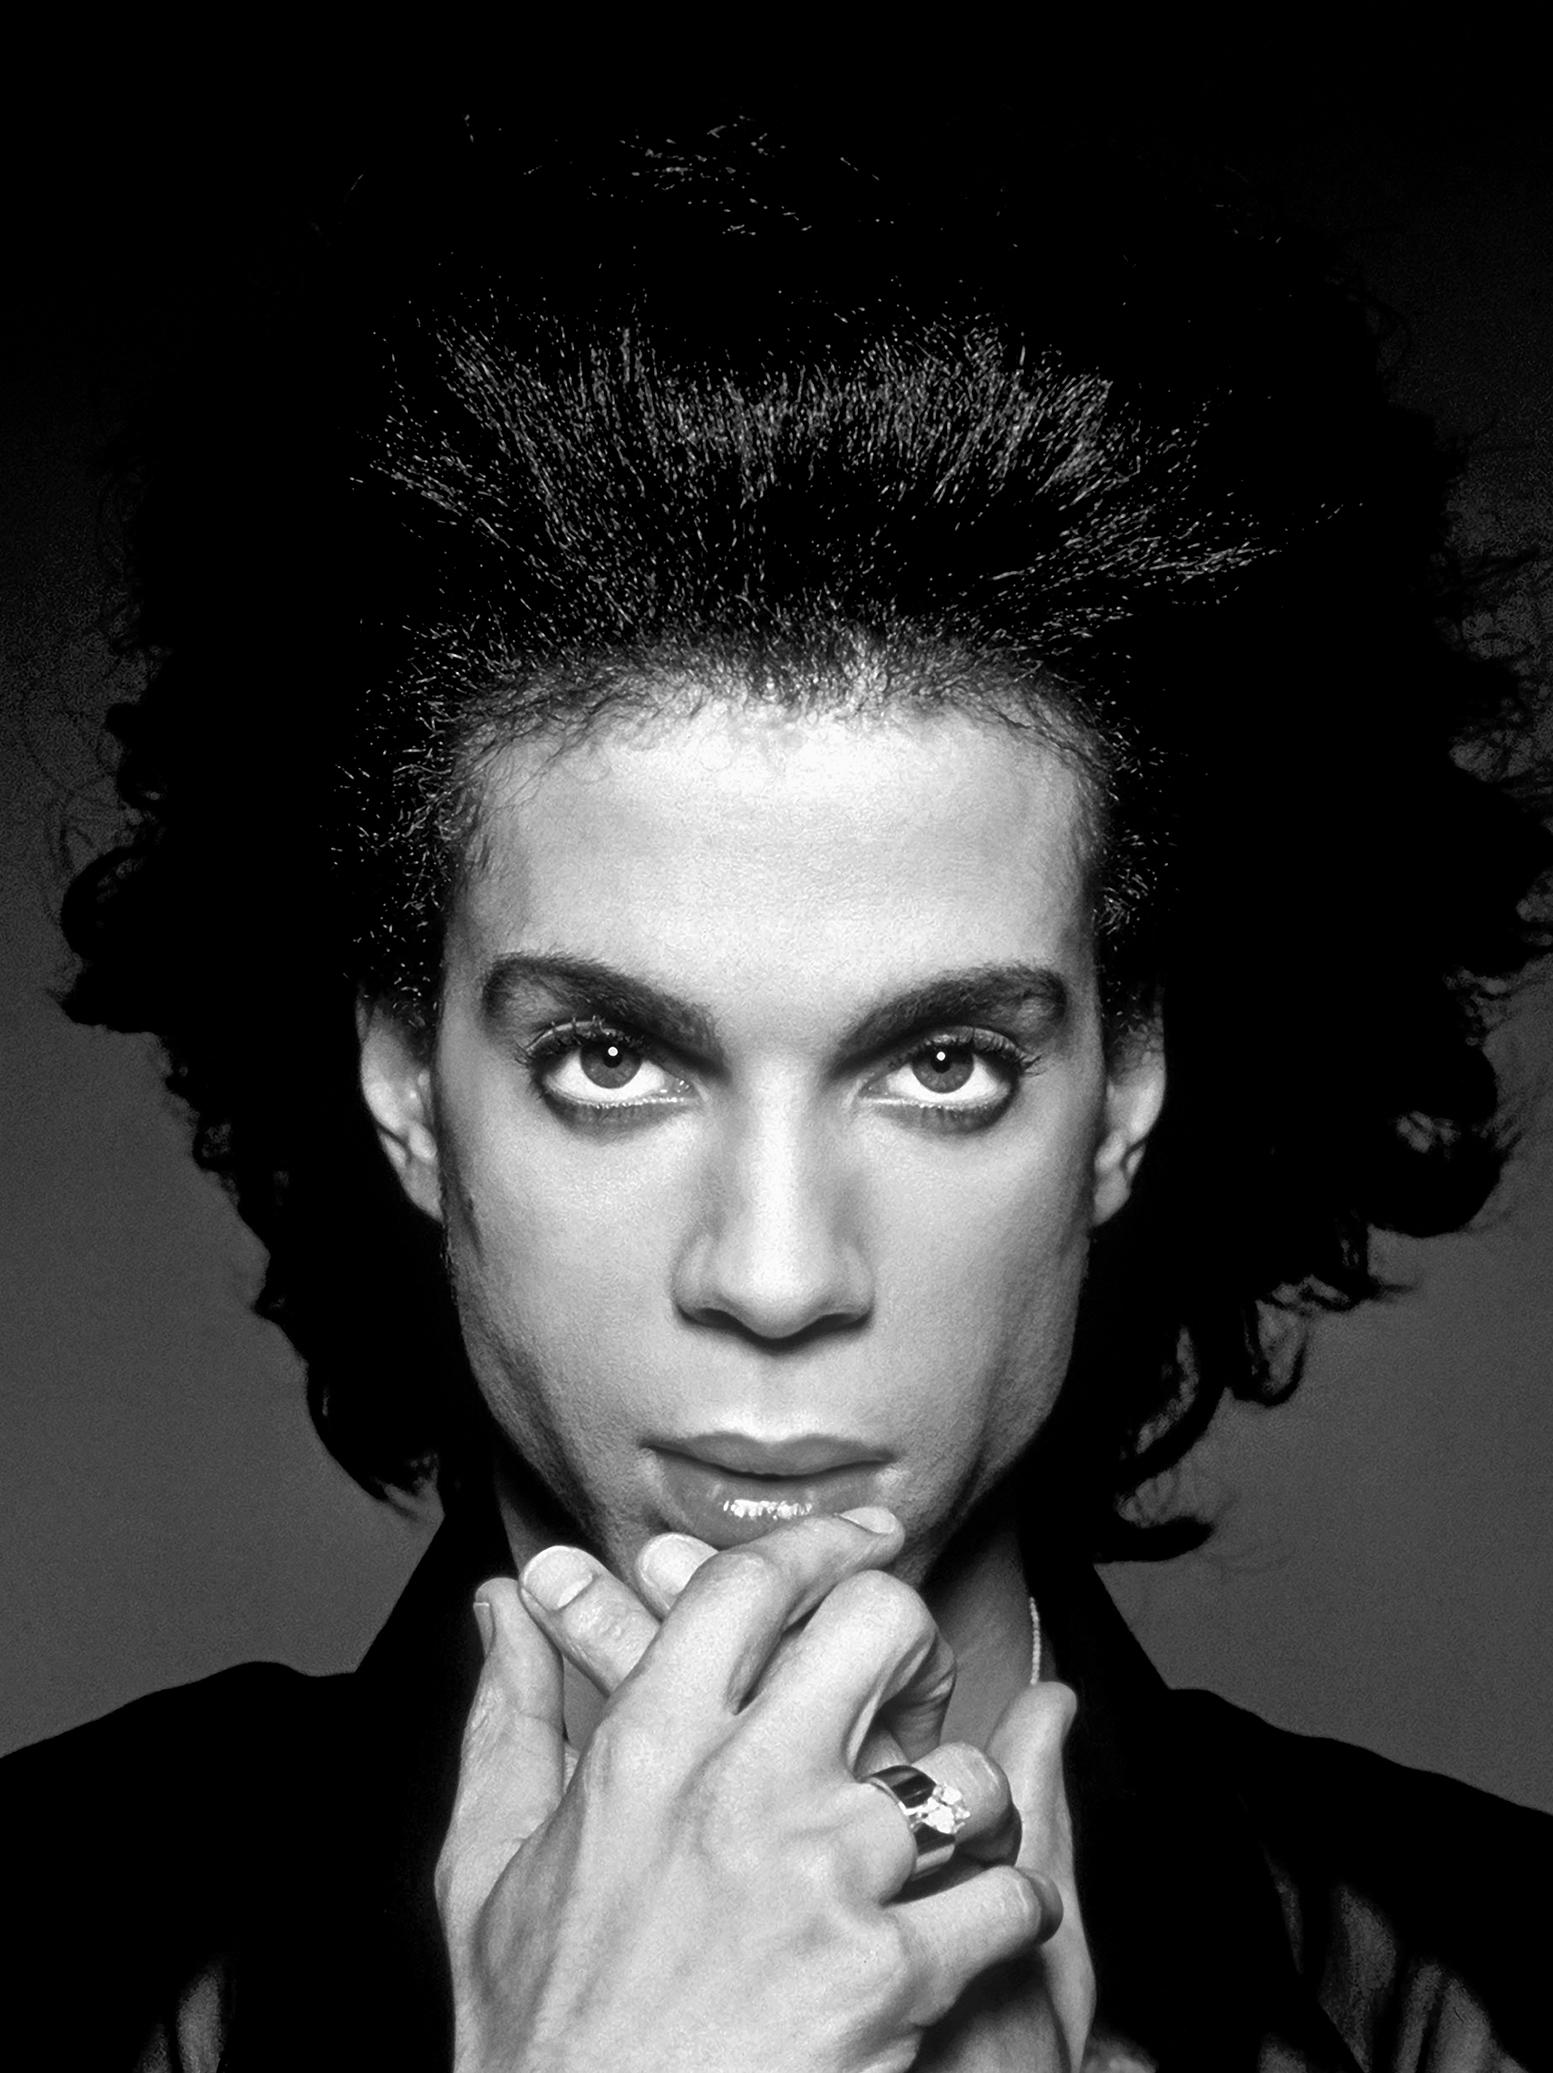 Unknown Black and White Photograph - Prince, The Artist